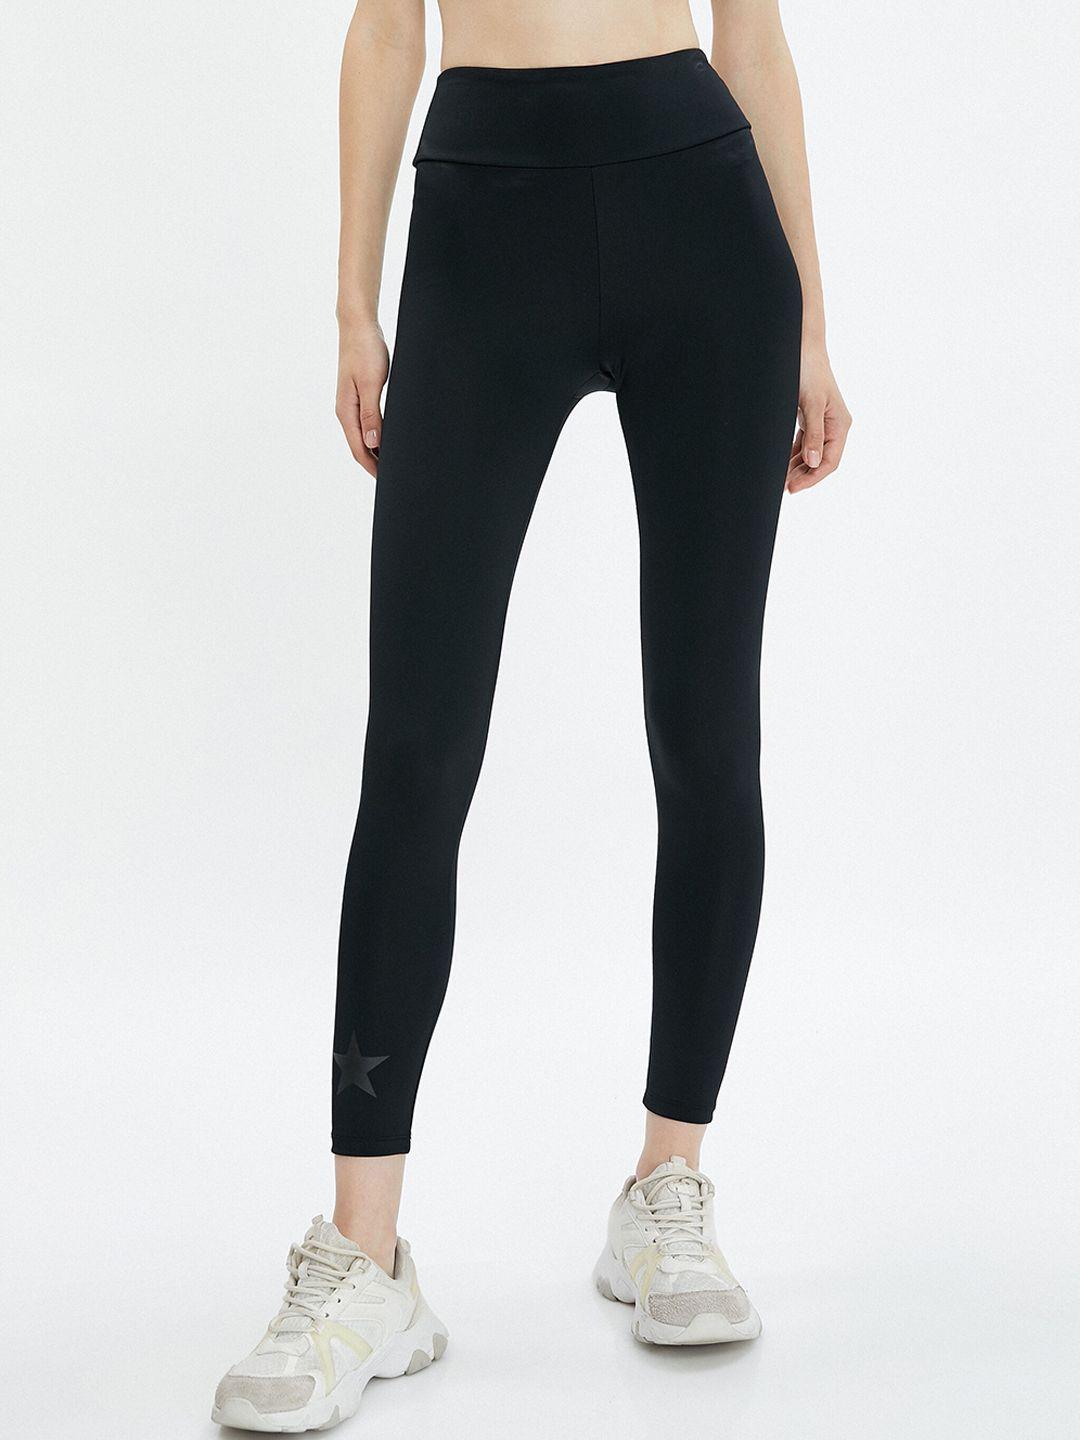 koton ankle length tights